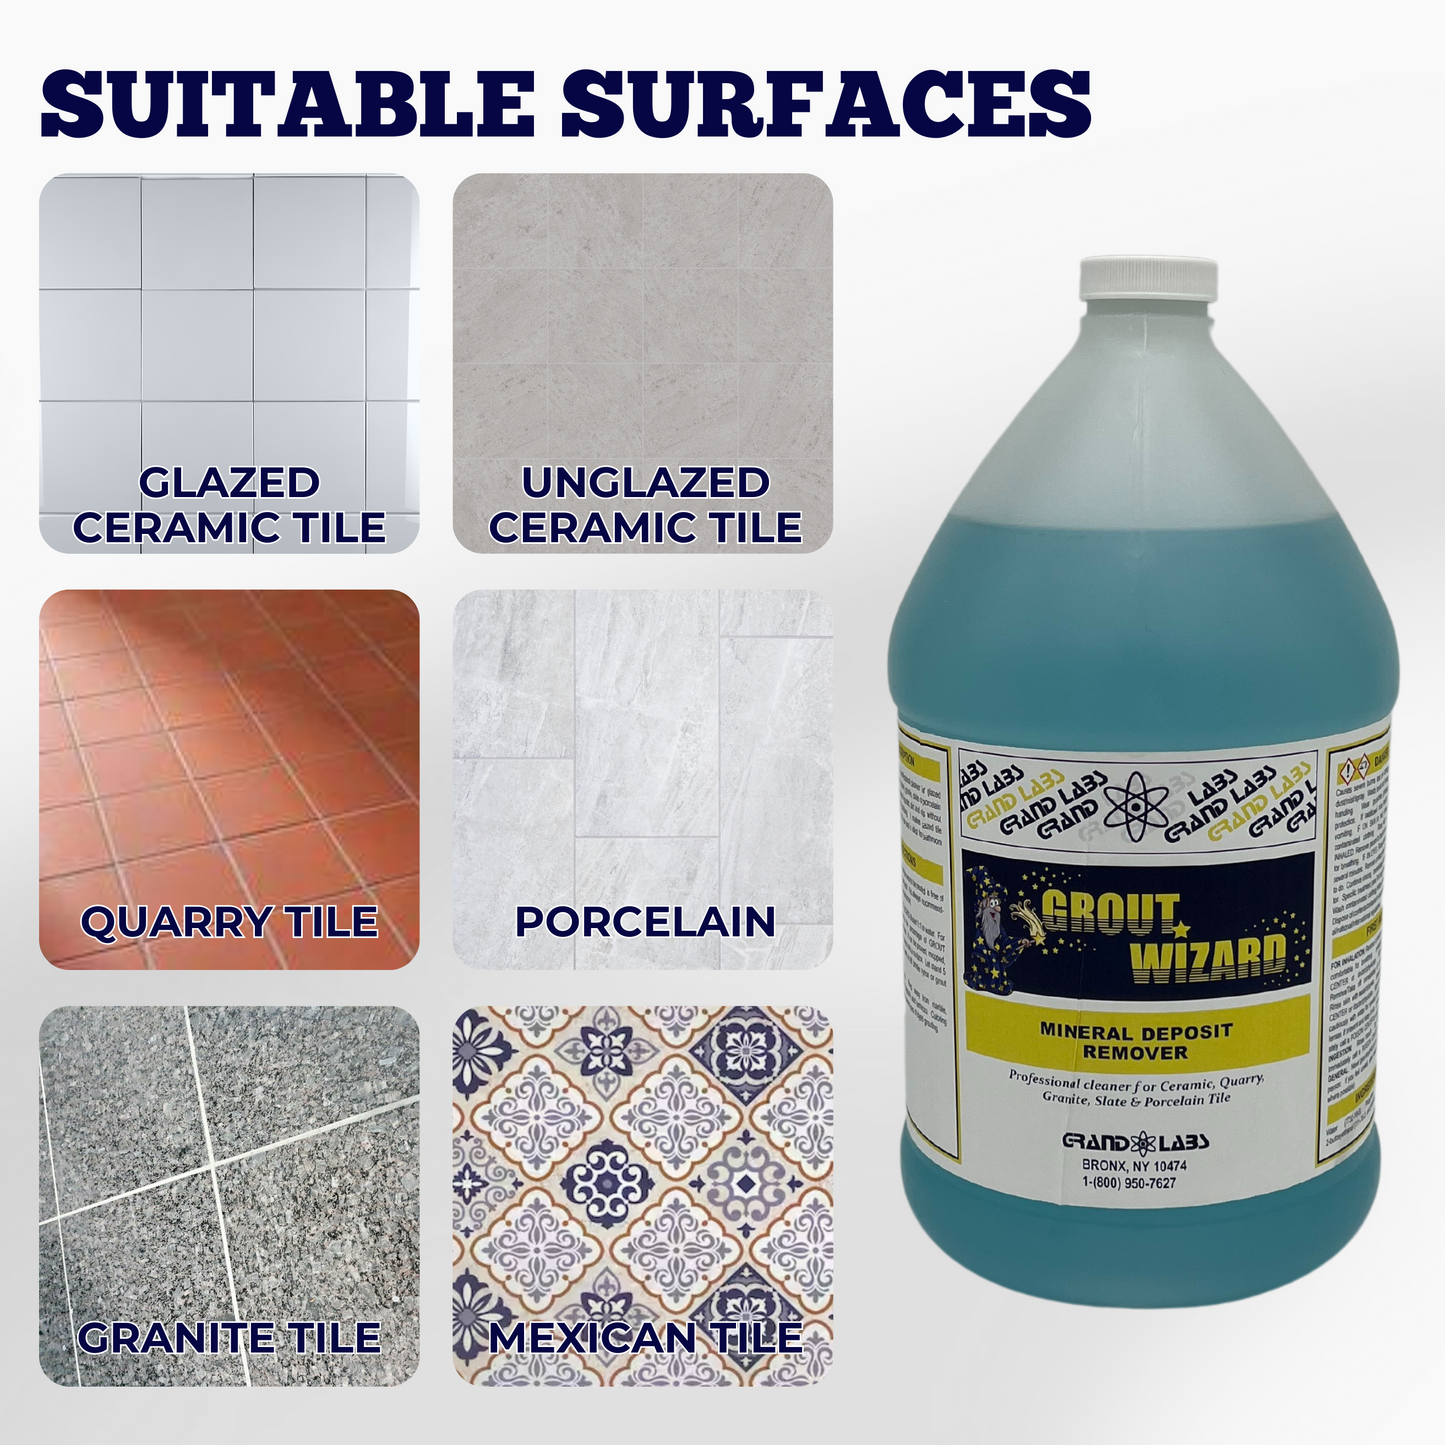 STONE-GLO Grout Wizard | by Grand Labs Grout Radiance Ultra - Premium Mineral Deposit Grout Cleaner & Stain Remover for Ceramic, Quarry, Granite, Slate and Porcelain Tile Finish